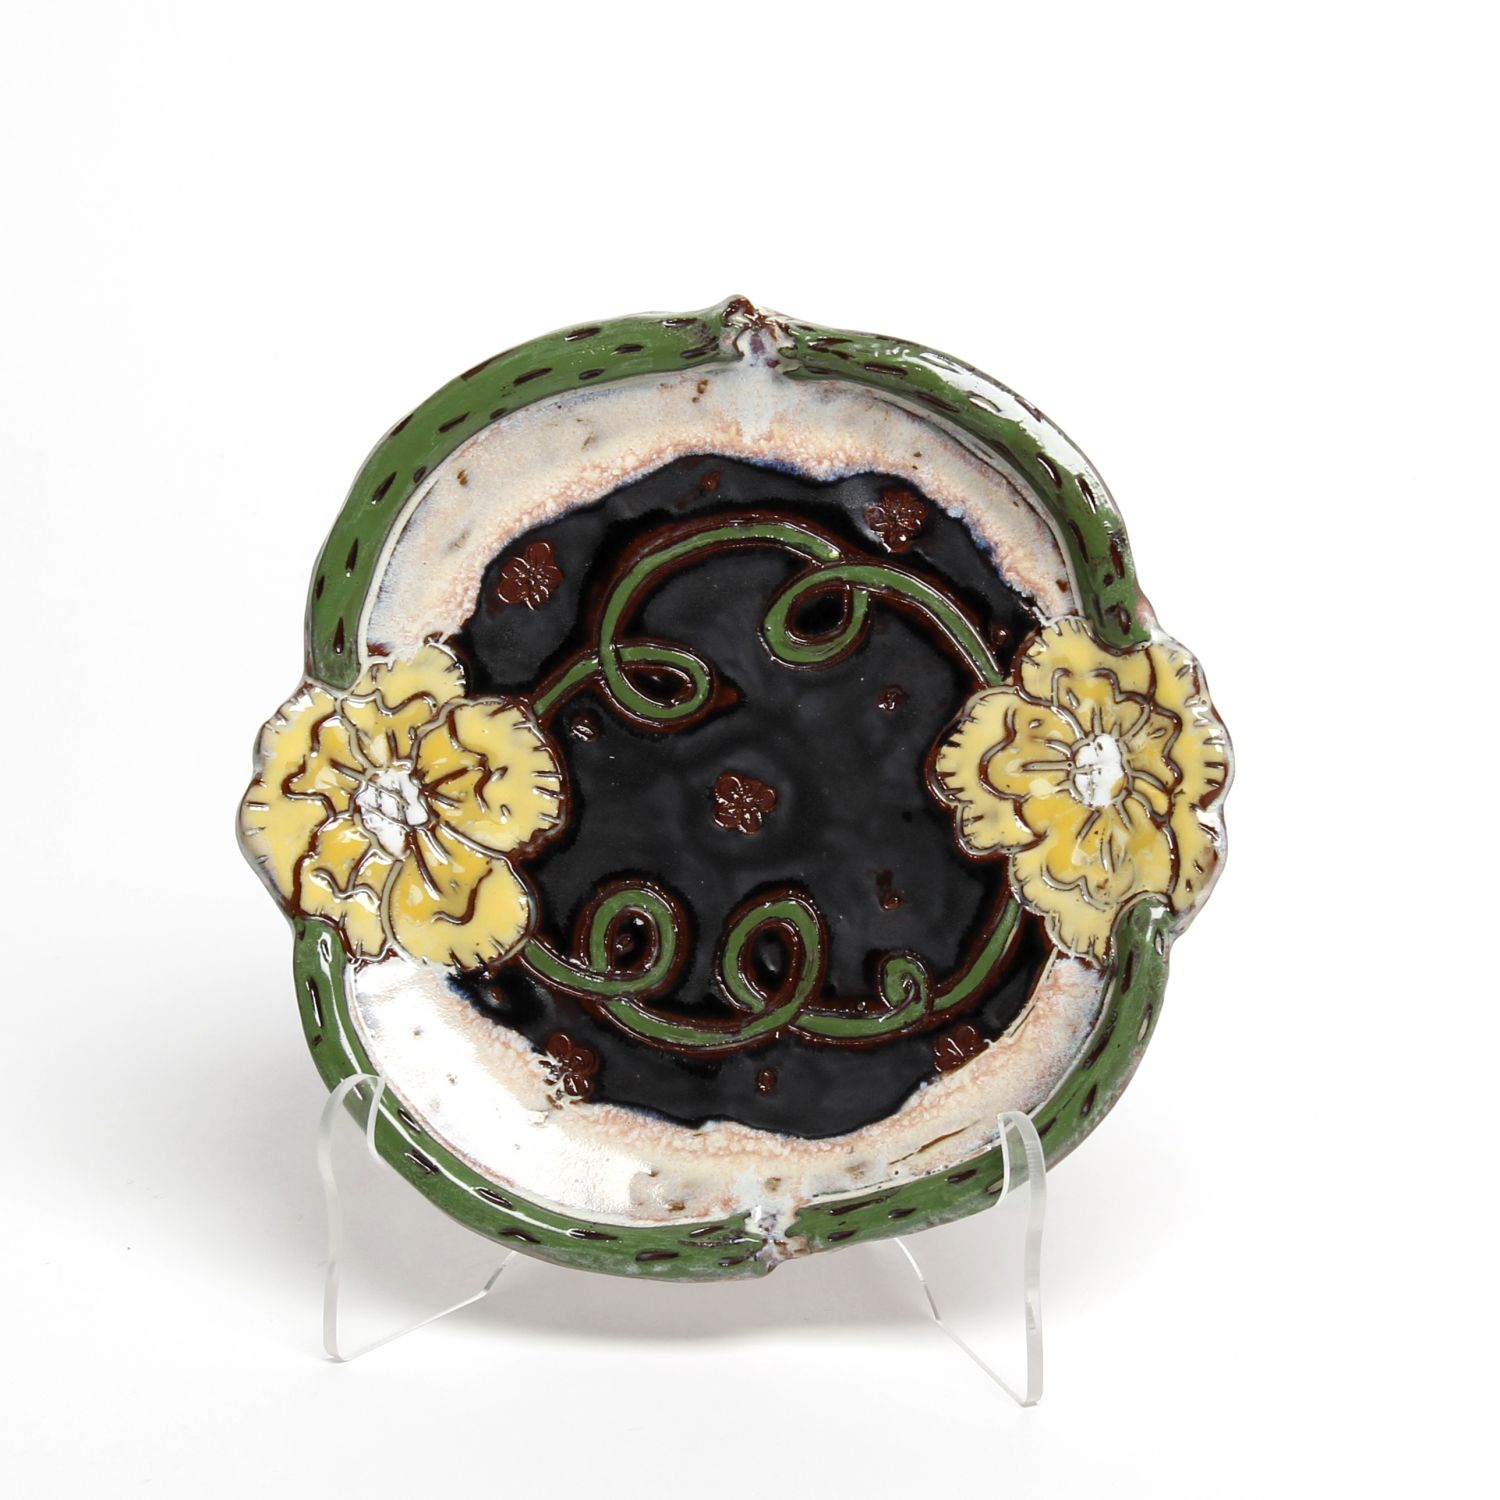 Zoe Pinnell: Yellow Flower Plate Product Image 1 of 3